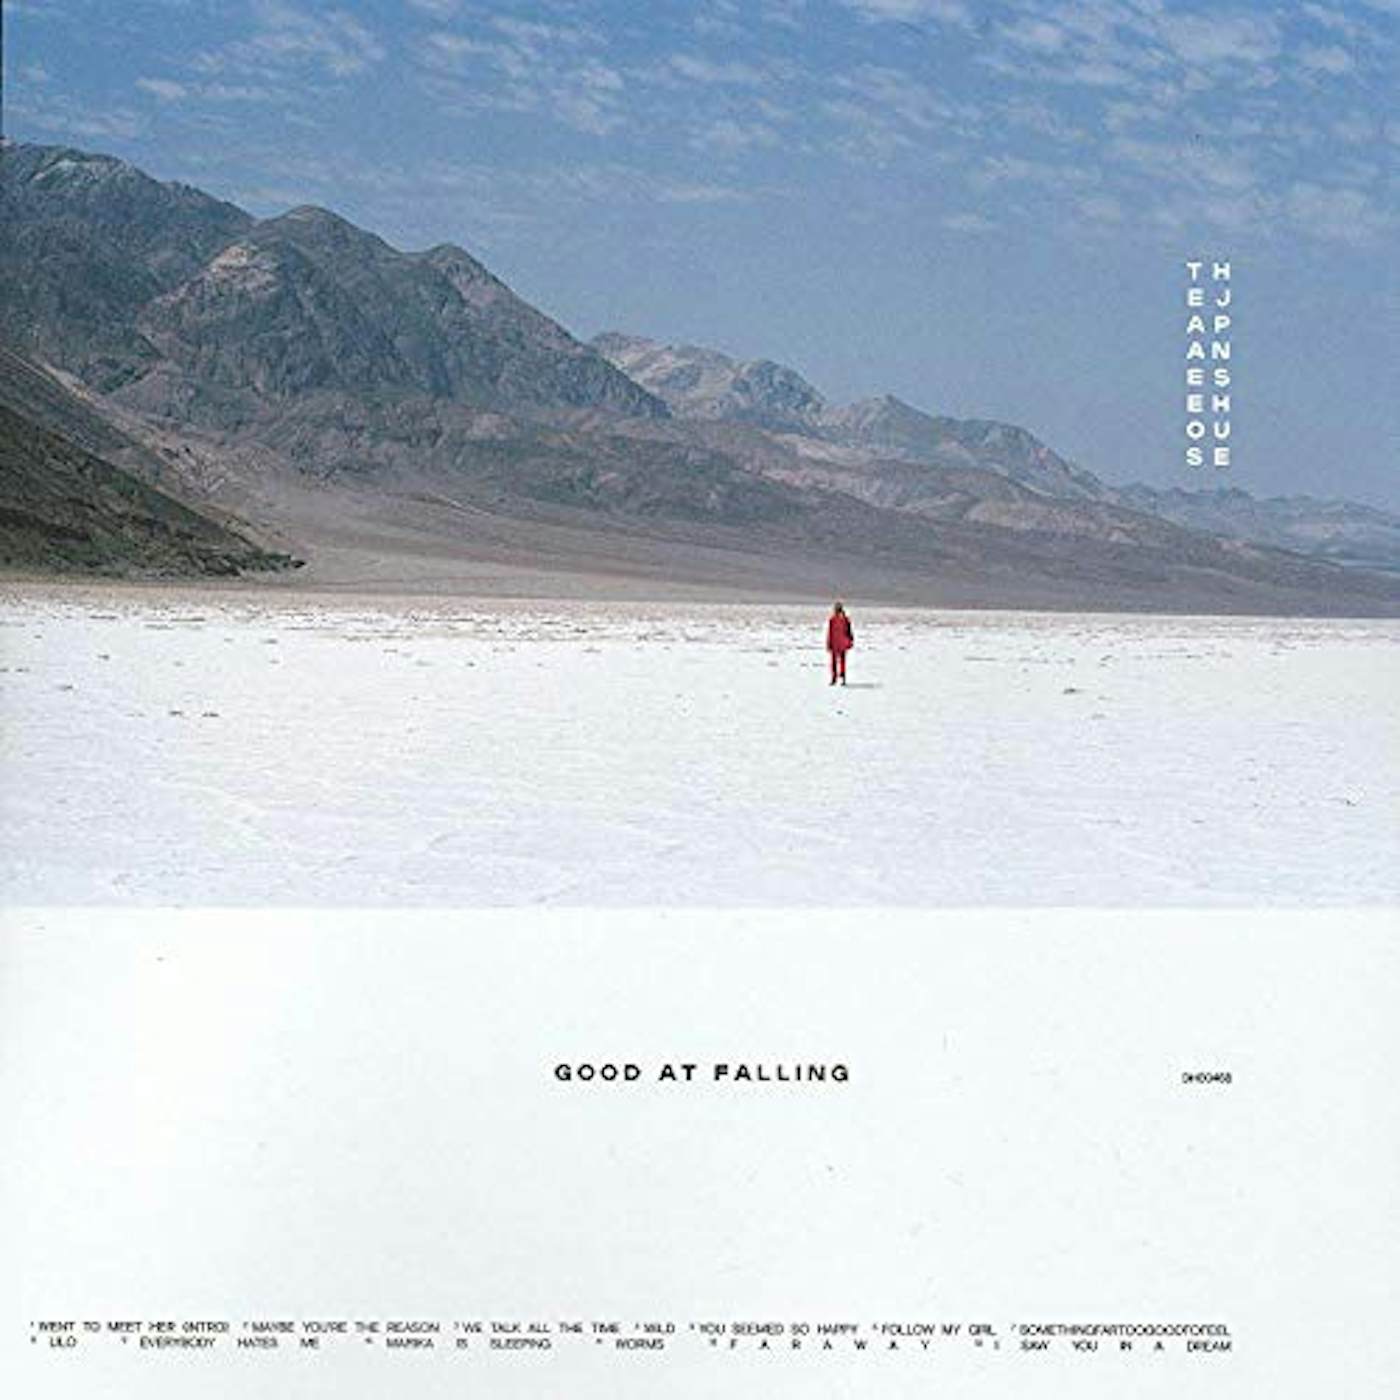 The Japanese House GOOD AT FALLING CD